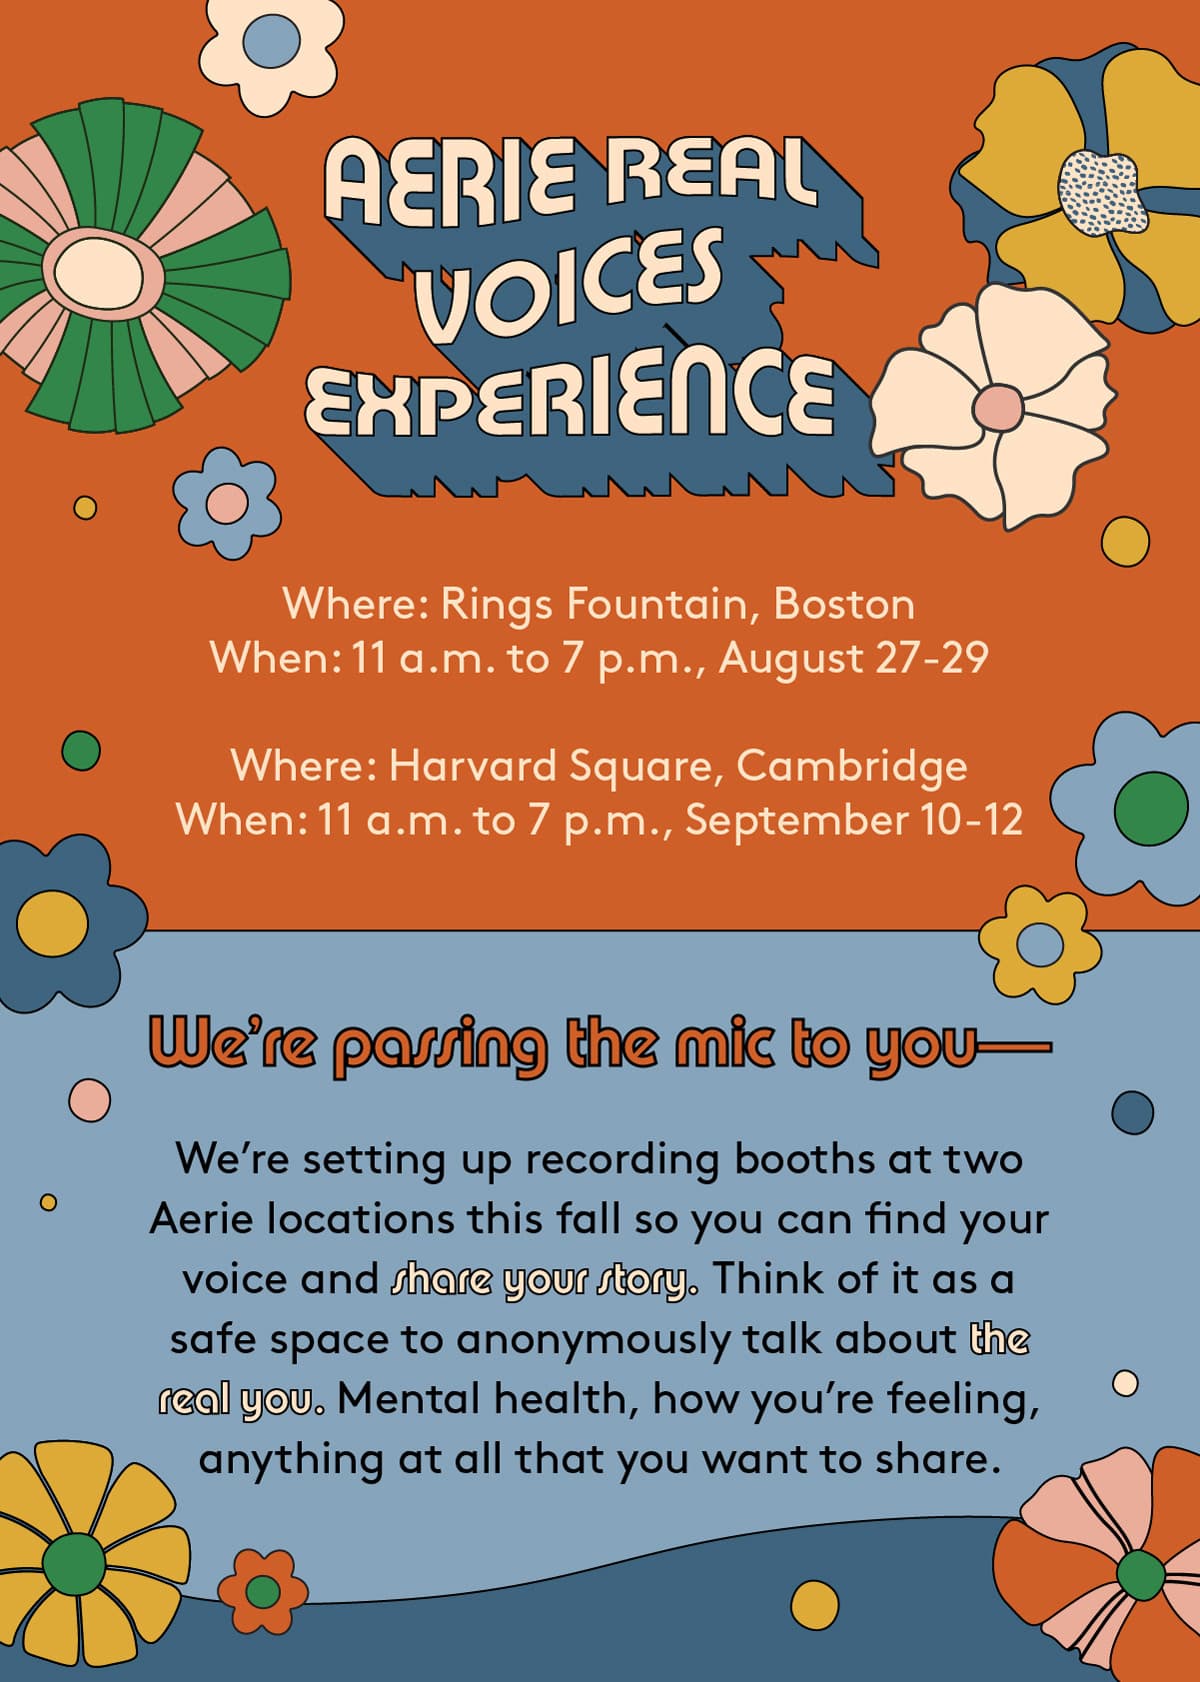 We’re passing the mic to you — we’re setting up recording booths at two Aerie locations this fall so you can find your voice and share your story. Think of it as a safe space to anonymously talk about body image, mental health, how you’re feeling, anything at all that will help you rediscover the real you. 